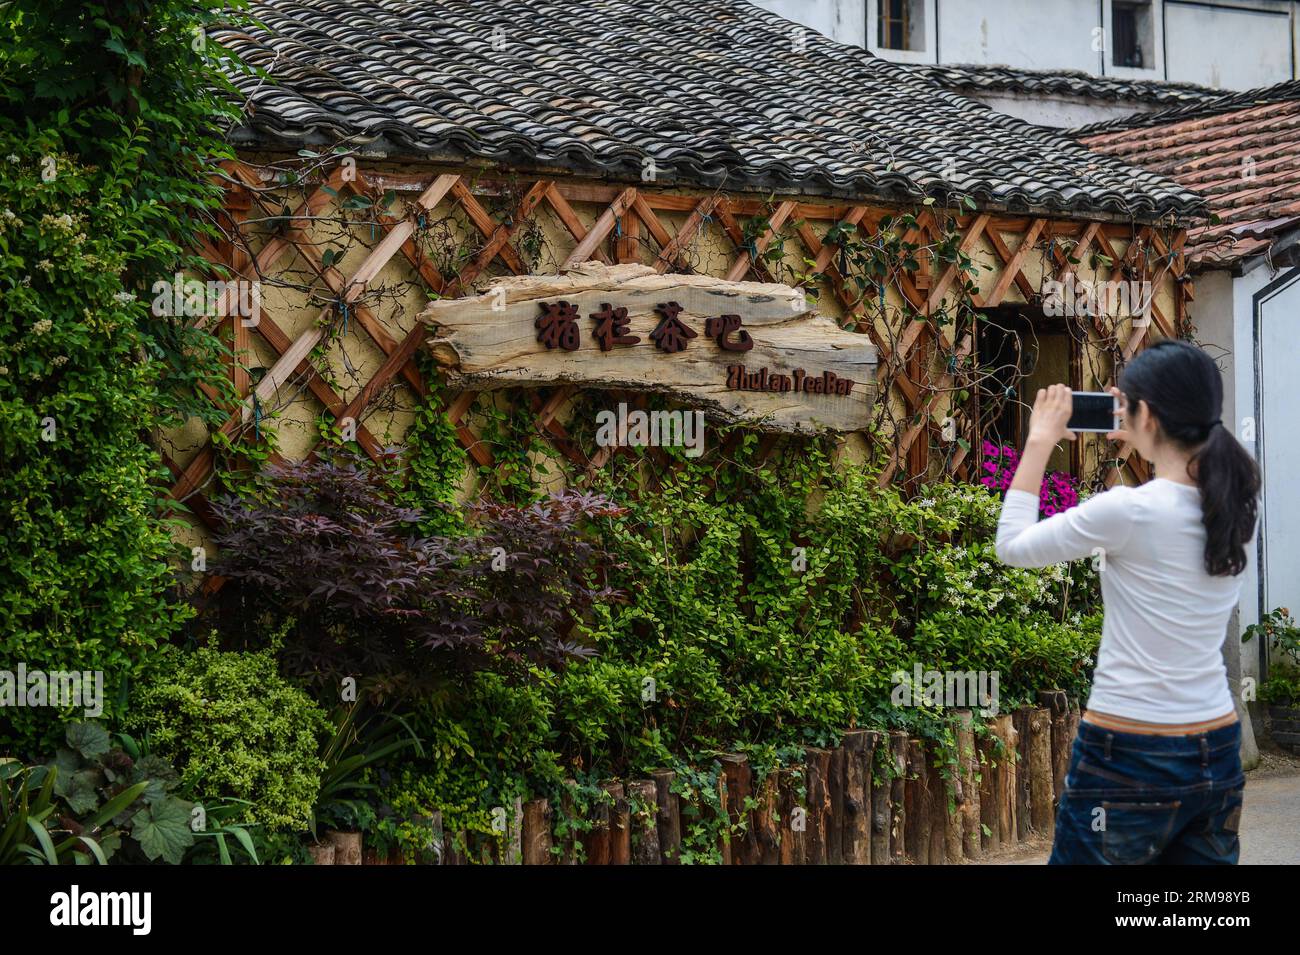 (140513) -- TONGLU, May 13, 2014 (Xinhua) -- A tourist takes photo of the swinery tea bar in Dipu Village of Jiangnan Town in Tonglu County, east China s Zhejiang Province, May 13, 2014. Dipu Village, a national historical and cultural village with nearly a thousand years history, has committed to environment reform, village protection and tourism development for the past few years. The swinery tea bar sets a successful example of the transform. The bar used to be five messy stone houses for pigs keeping. After renovation, it functions as a modern tea bar with traditional appearance, attractin Stock Photo